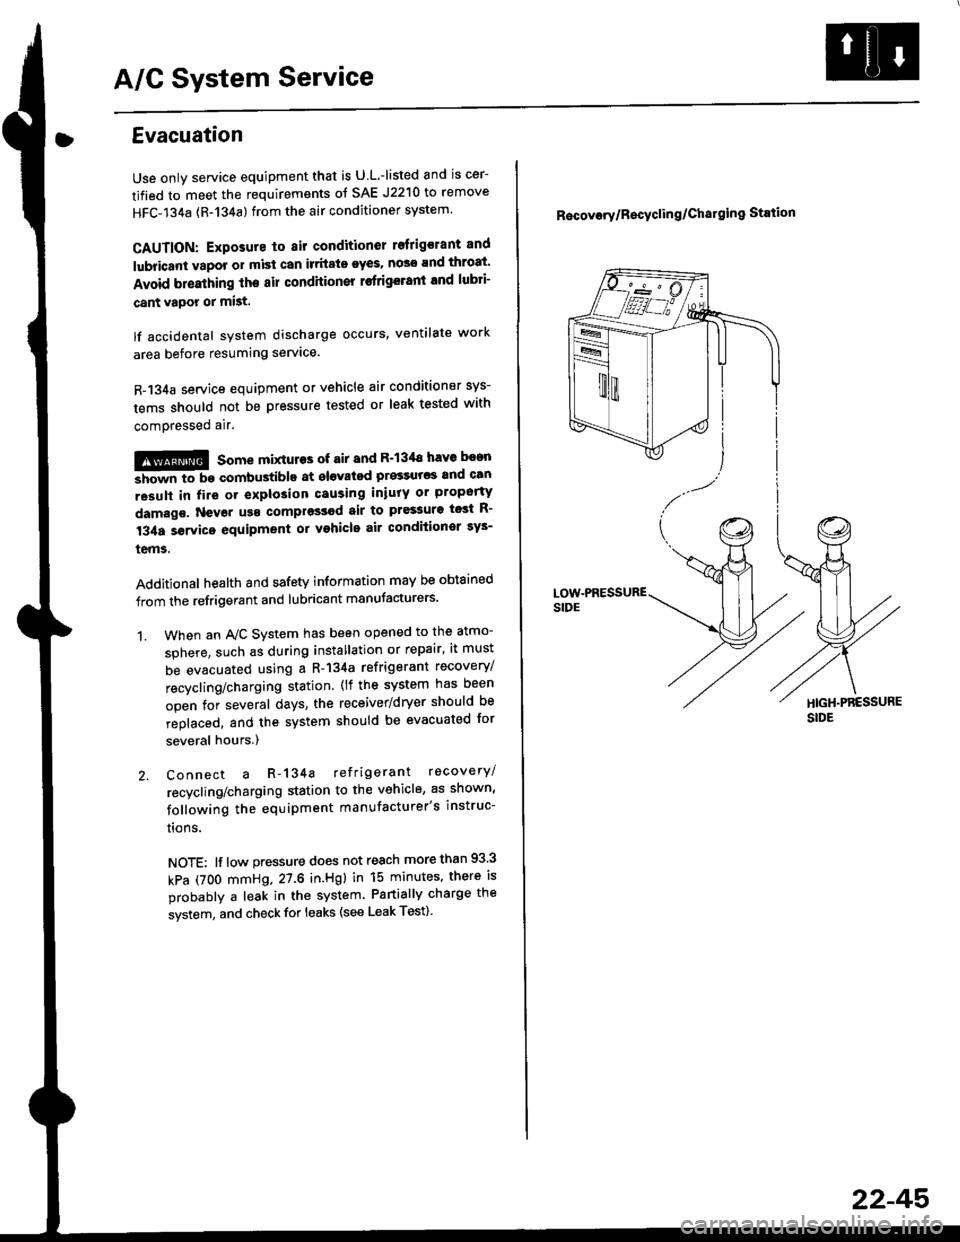 HONDA CIVIC 1998 6.G Service Manual A/C System Service
Evacuation
Use only service equipment that is U L.-listed and is cer-
tified to meet the requirements oJ SAE J2210 to remove
HFC-134a (R-134a) from the air conditioner system
CAUTI